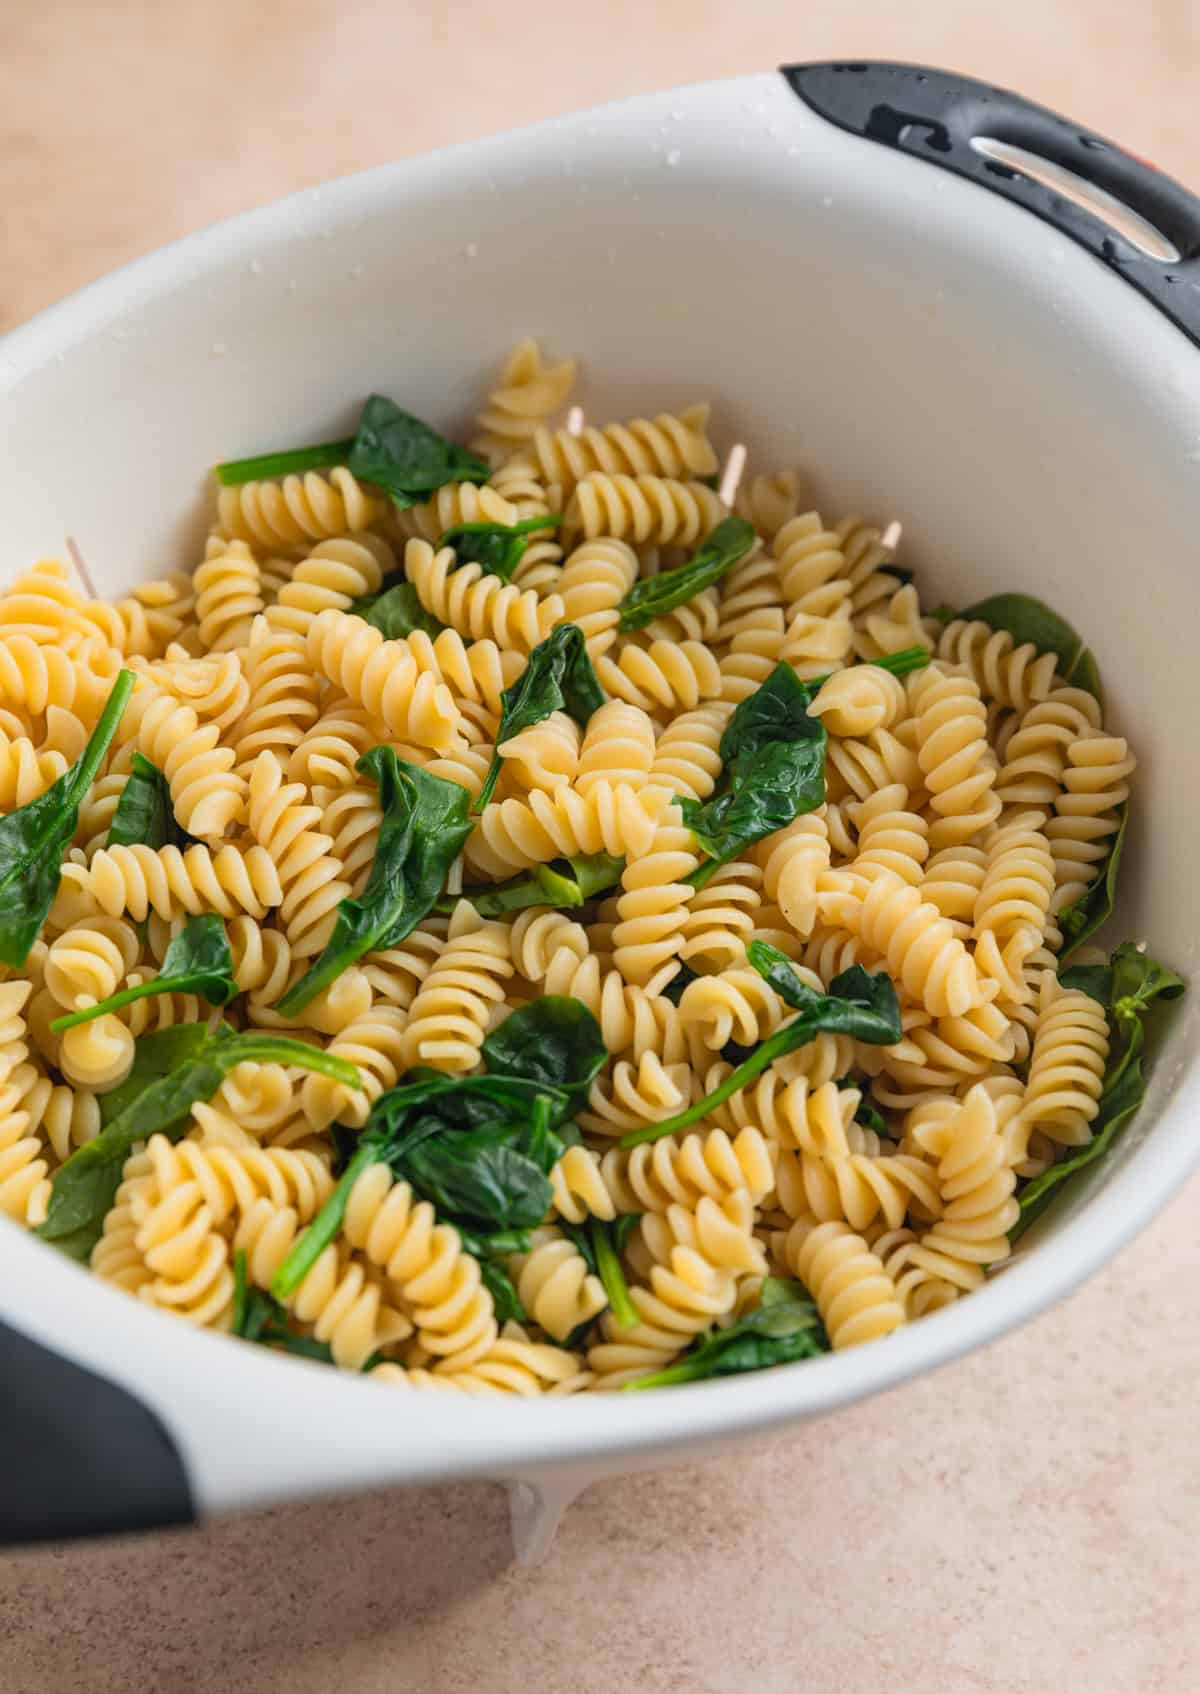 Cooked rotini pasta in colander with wilted spinach.